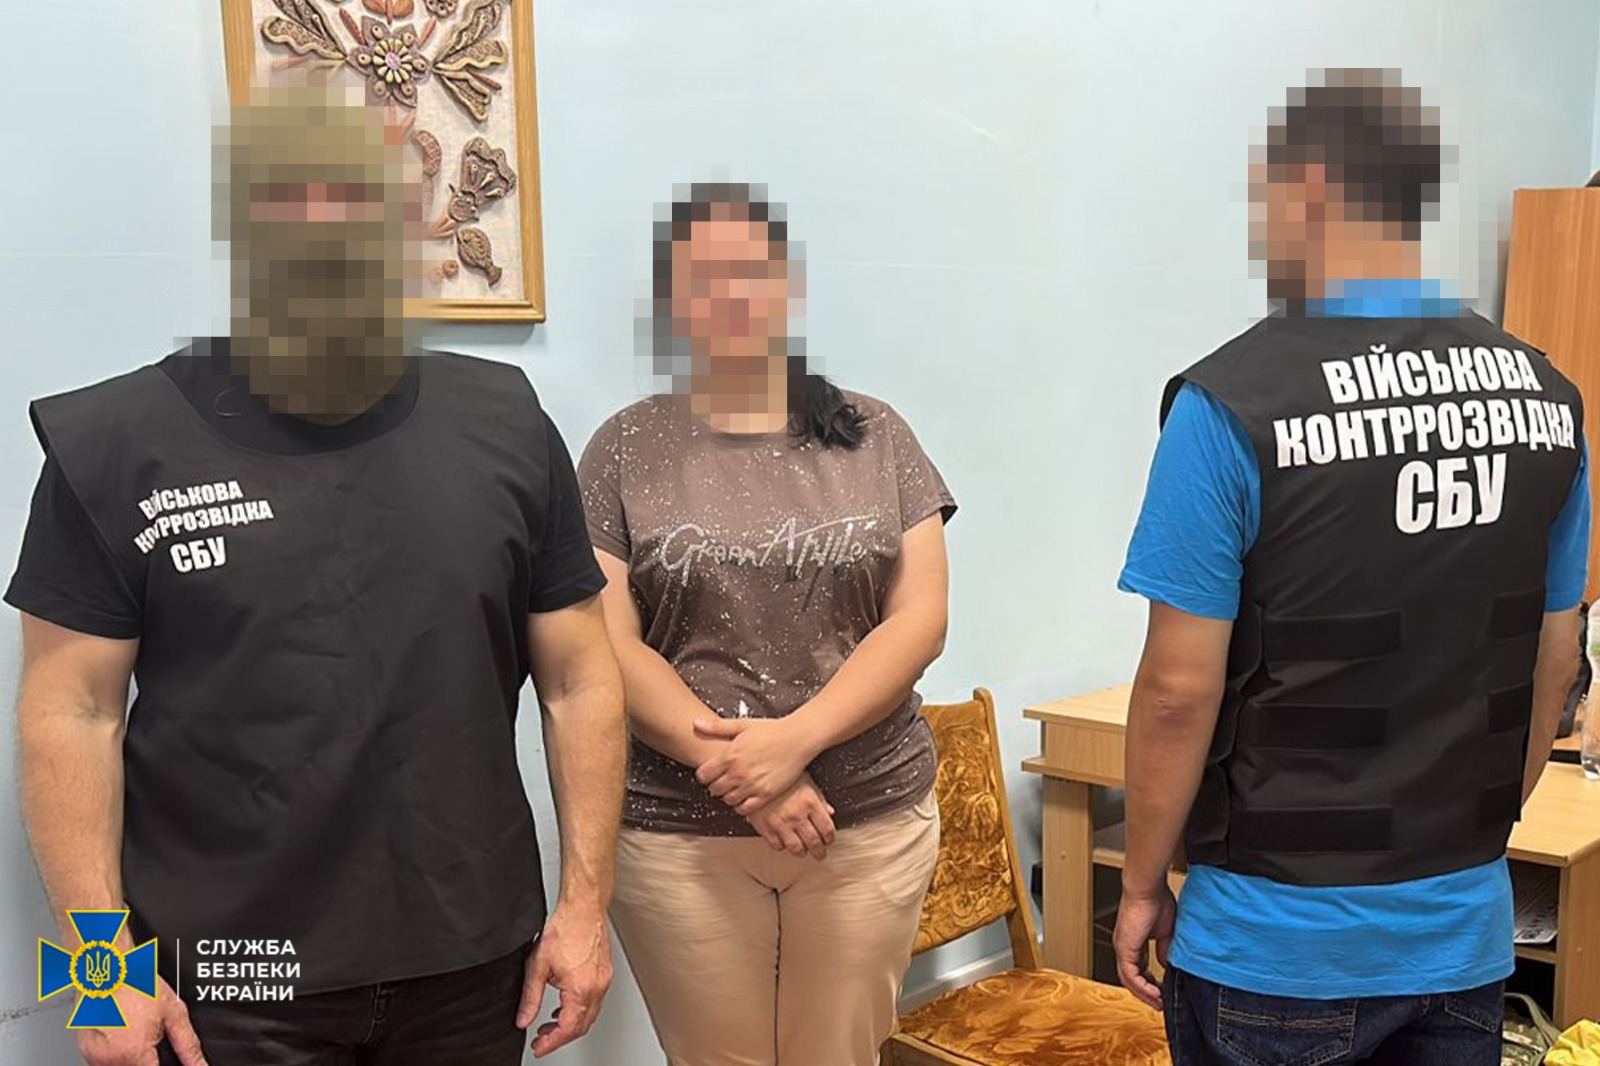 Counter-intelligence unit of SBU nabs another Russian agent in Kherson (Image Courtesy: Facebook)